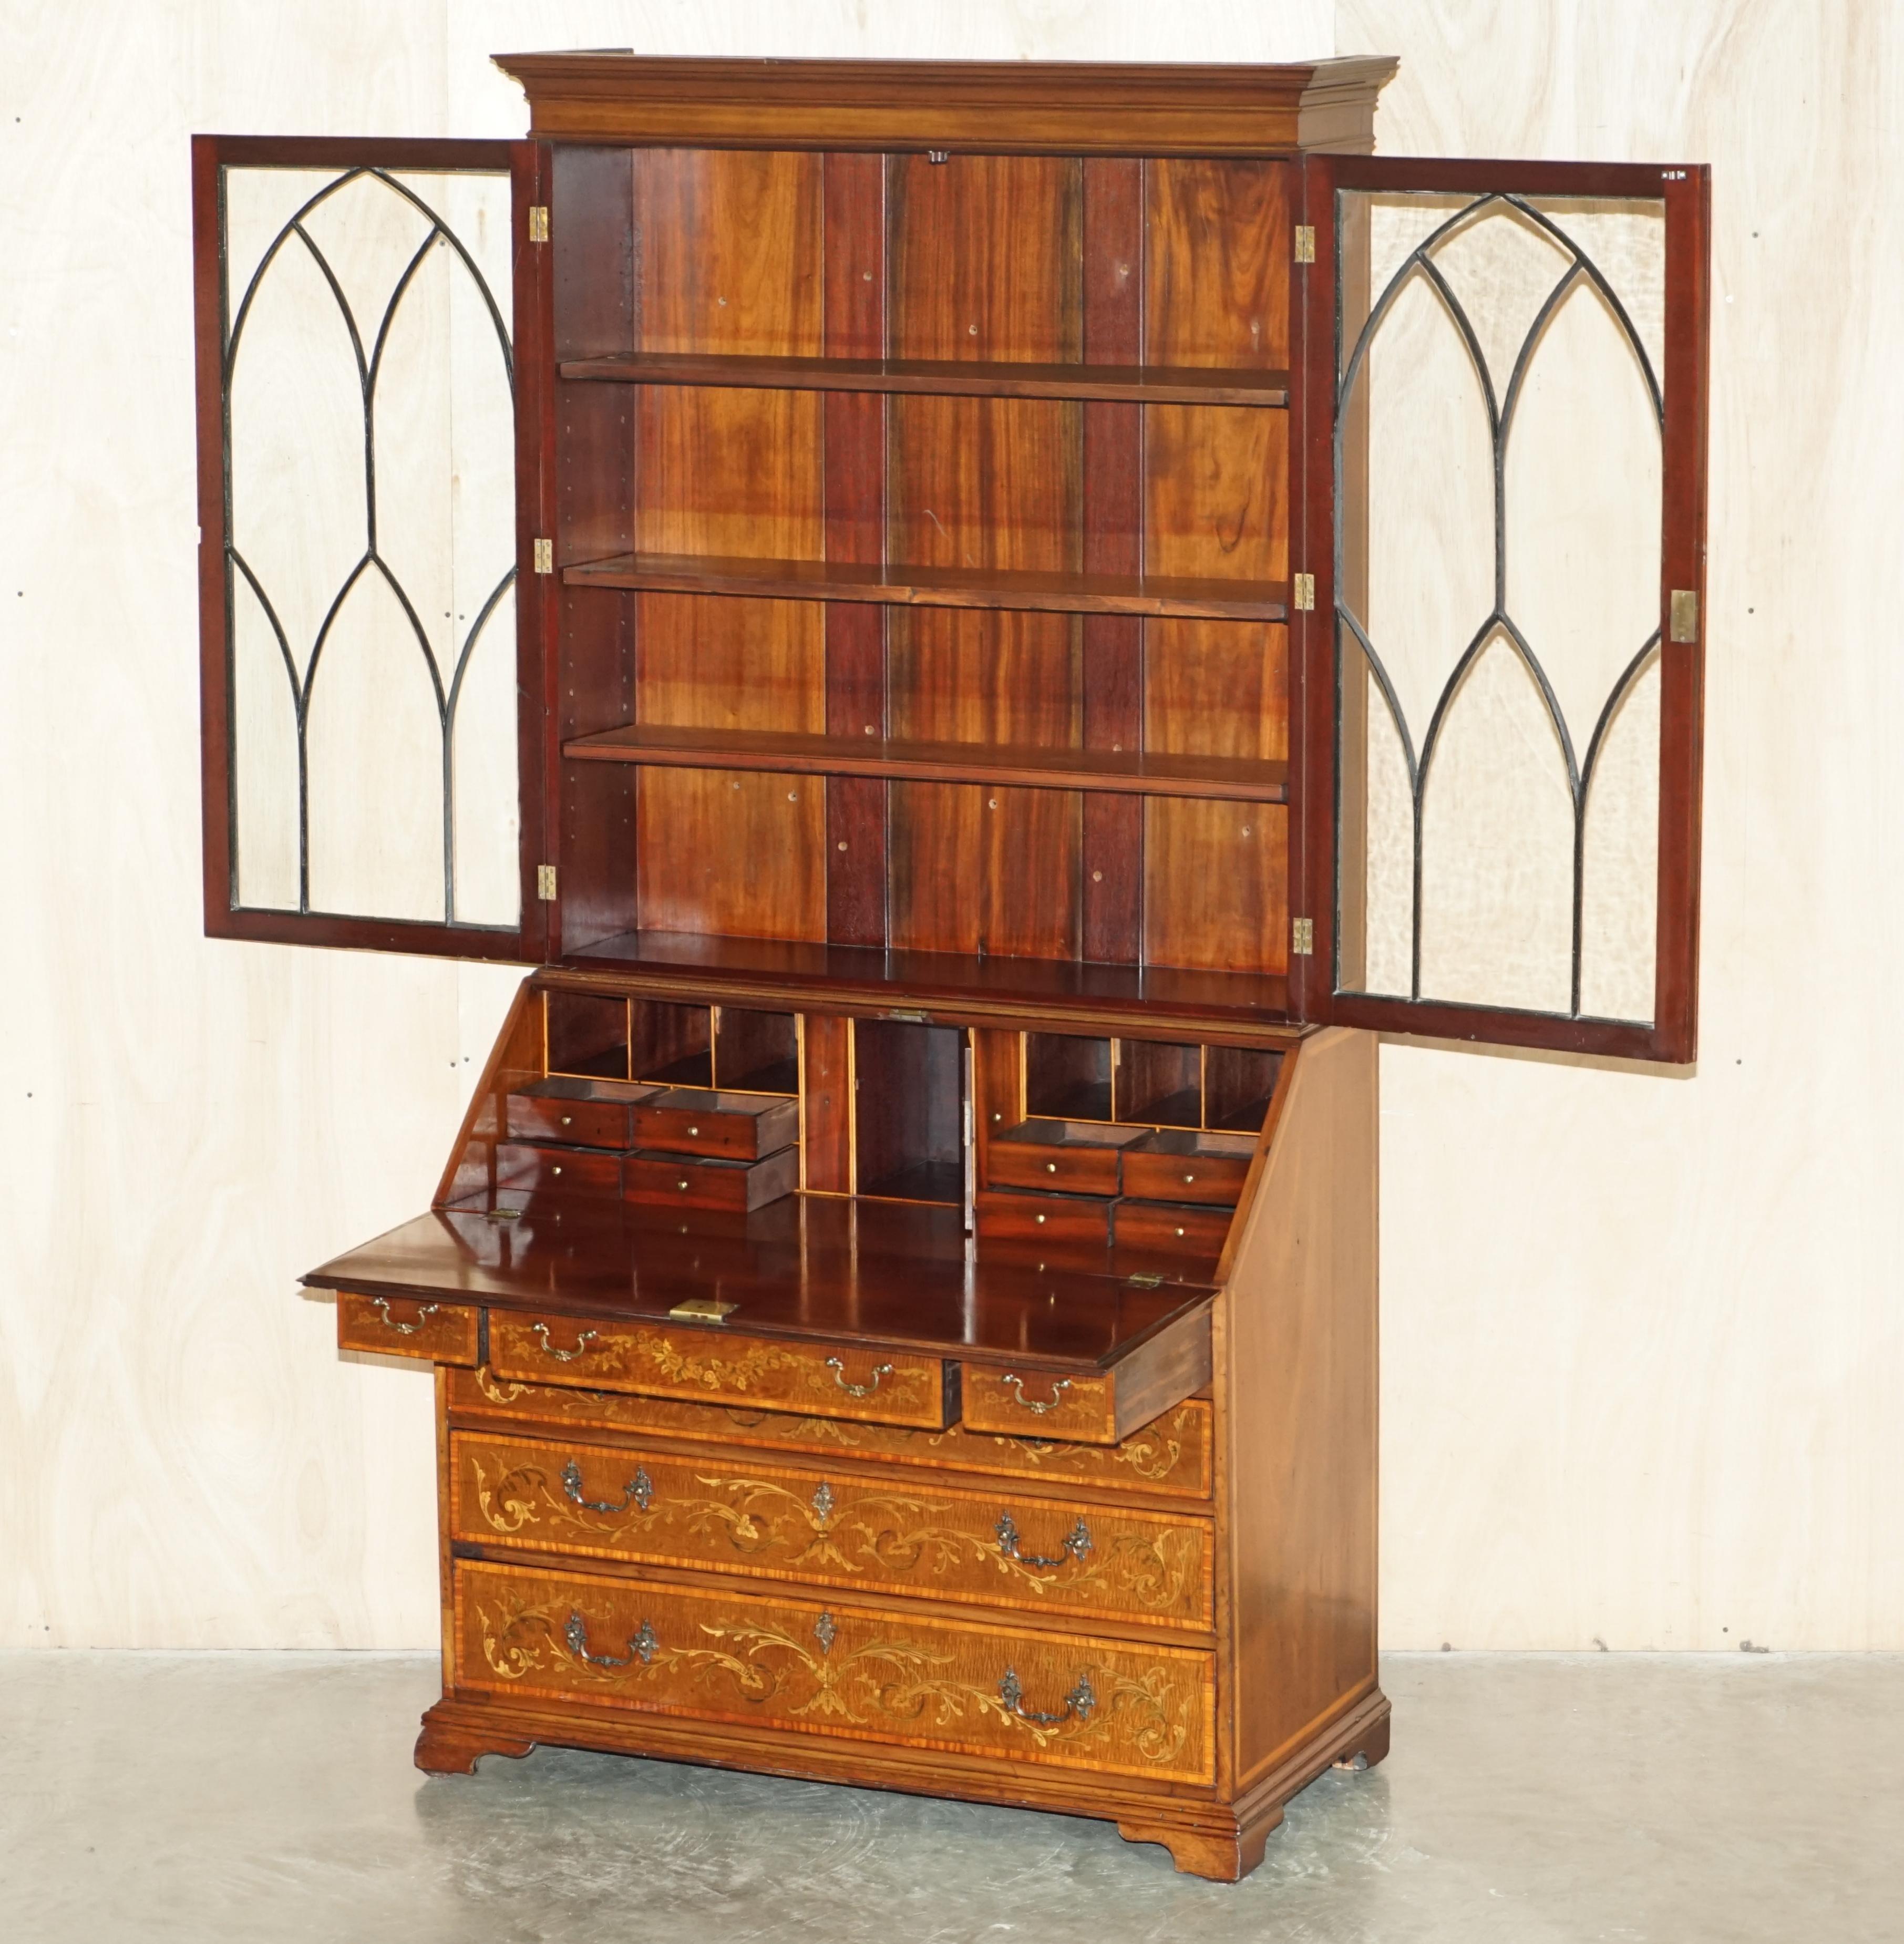 STUNNiNG ANTIQUE CIRCA 1840 SHERATON REVIVAL LIBRARY BUREAU BOOKCASE ON DRAWERS For Sale 11